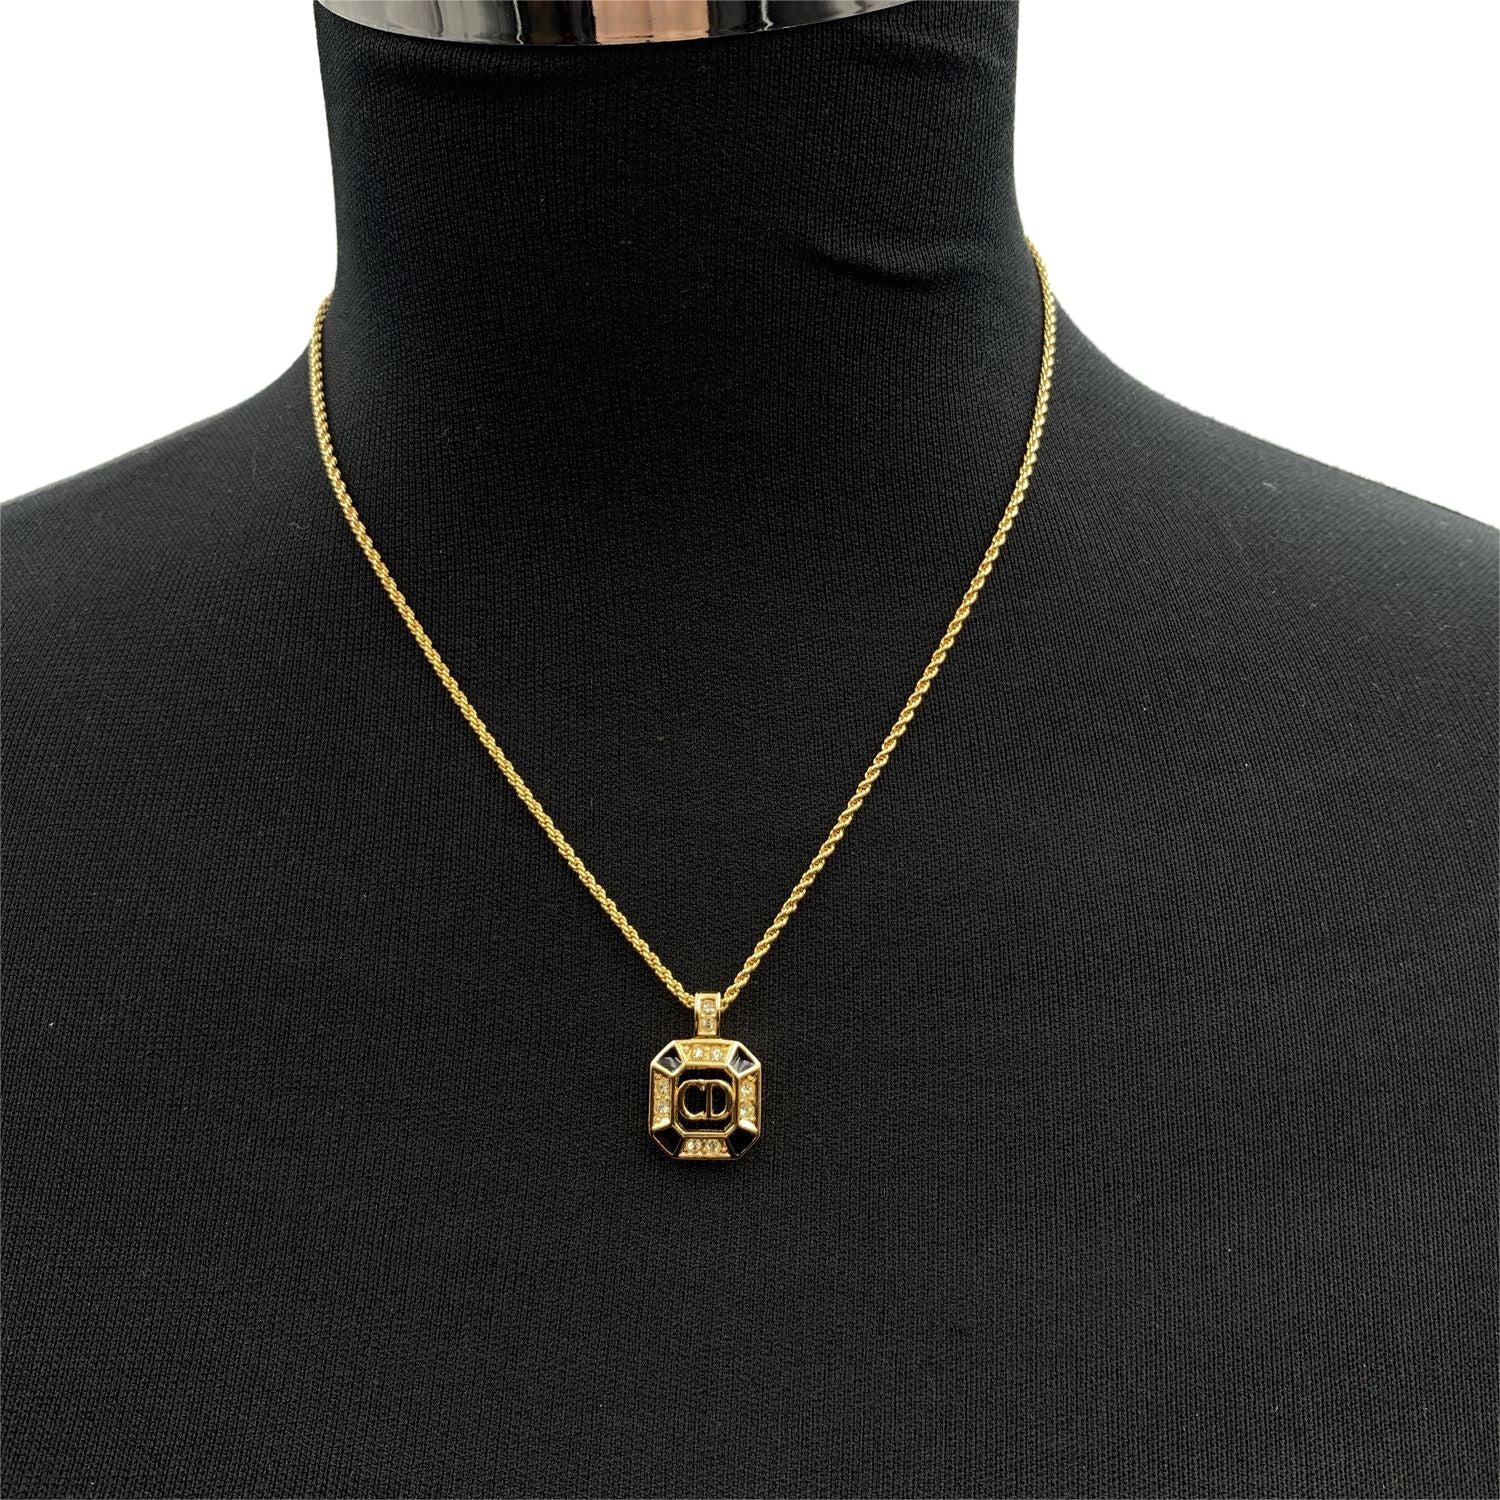 Vintage Christian Dior gold metal chain necklace with CD square logo pendant, embellished with small rhinestones and black enamel. Spring ring closure. SChain length: about 16.5 inches - 42 cm Condition A - EXCELLENT Gently used. Please, look